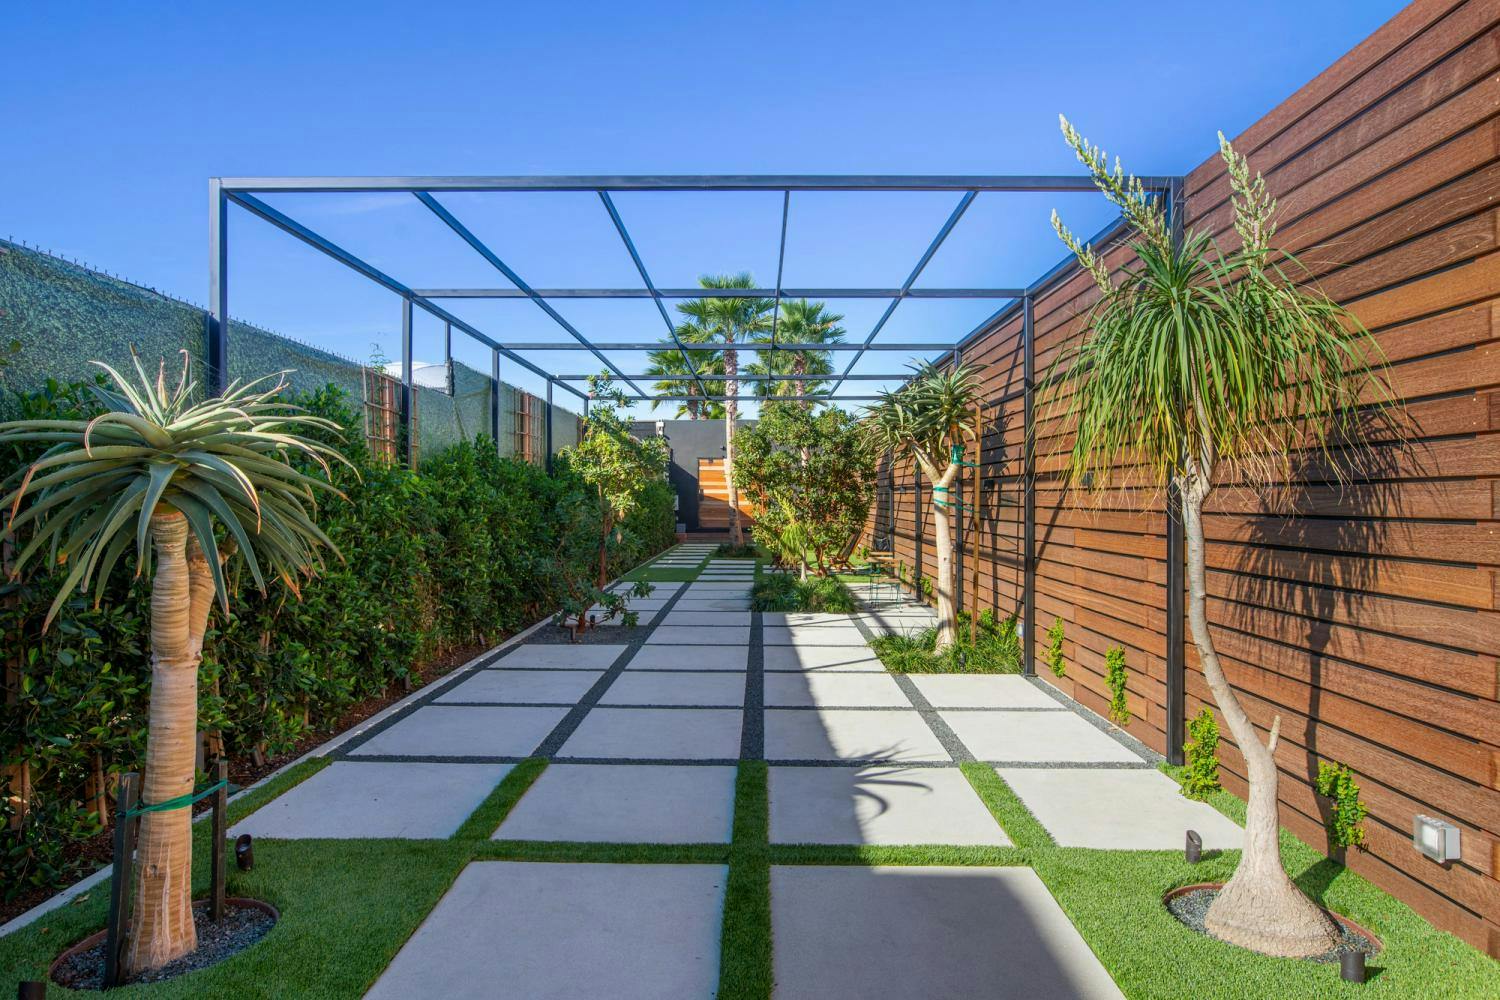 A landscaped garden path with symmetric stepping stones, flanked by wooden fences and exotic plants, under a metal pergola.